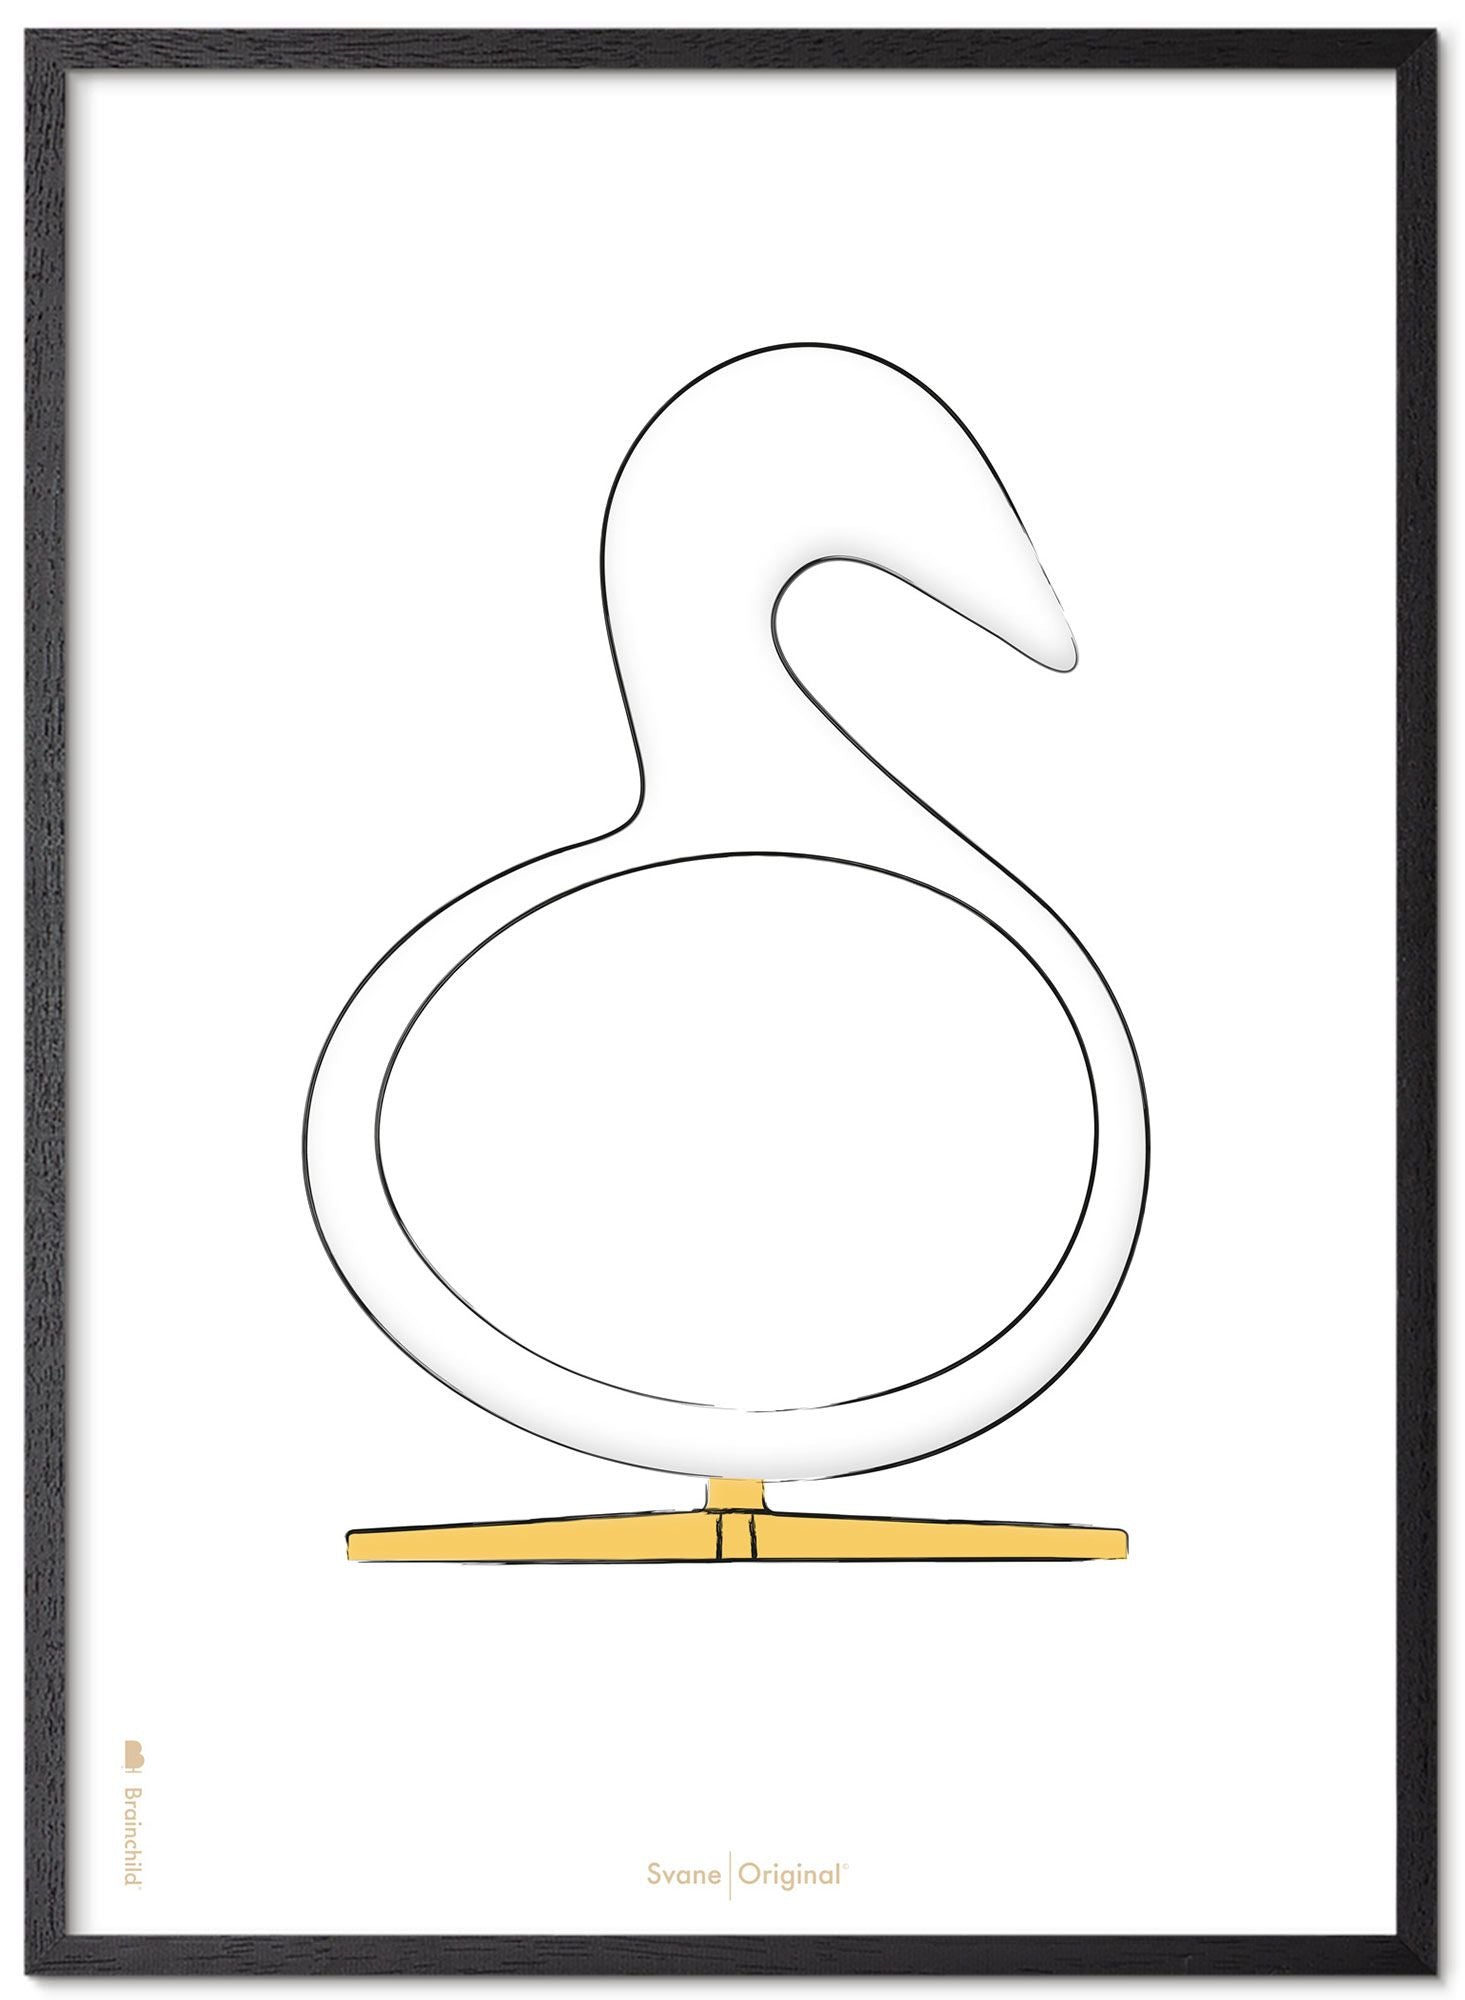 Brainchild Sketch Sketch Poster Poster Frame Made Of Black Lacquered Wood 30x40 Cm, White Background